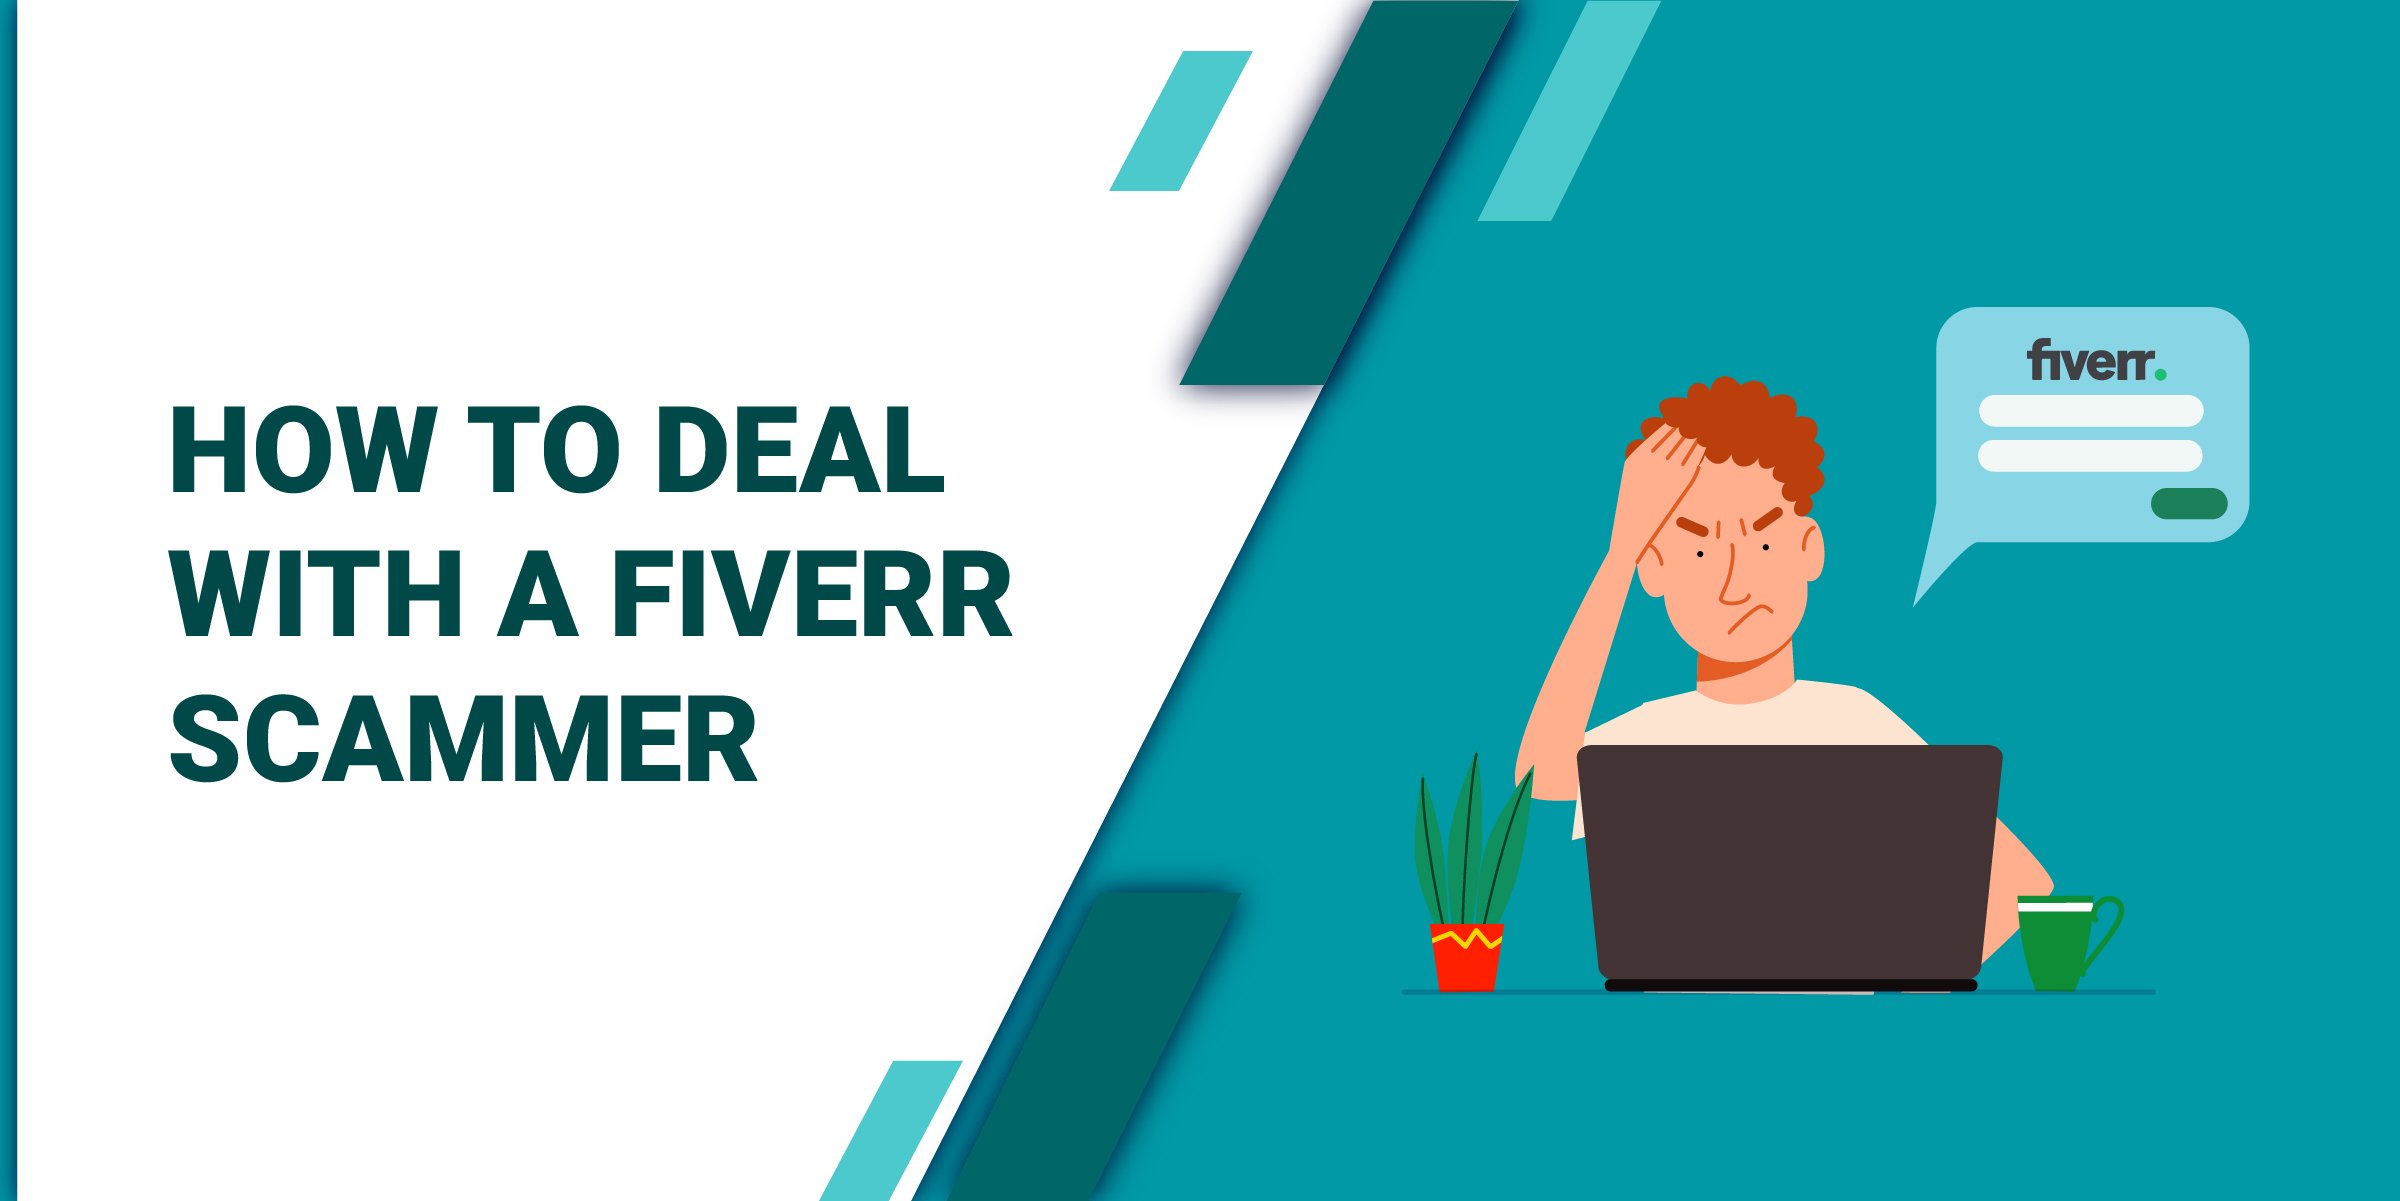 How to Deal With Fiverr Scammer